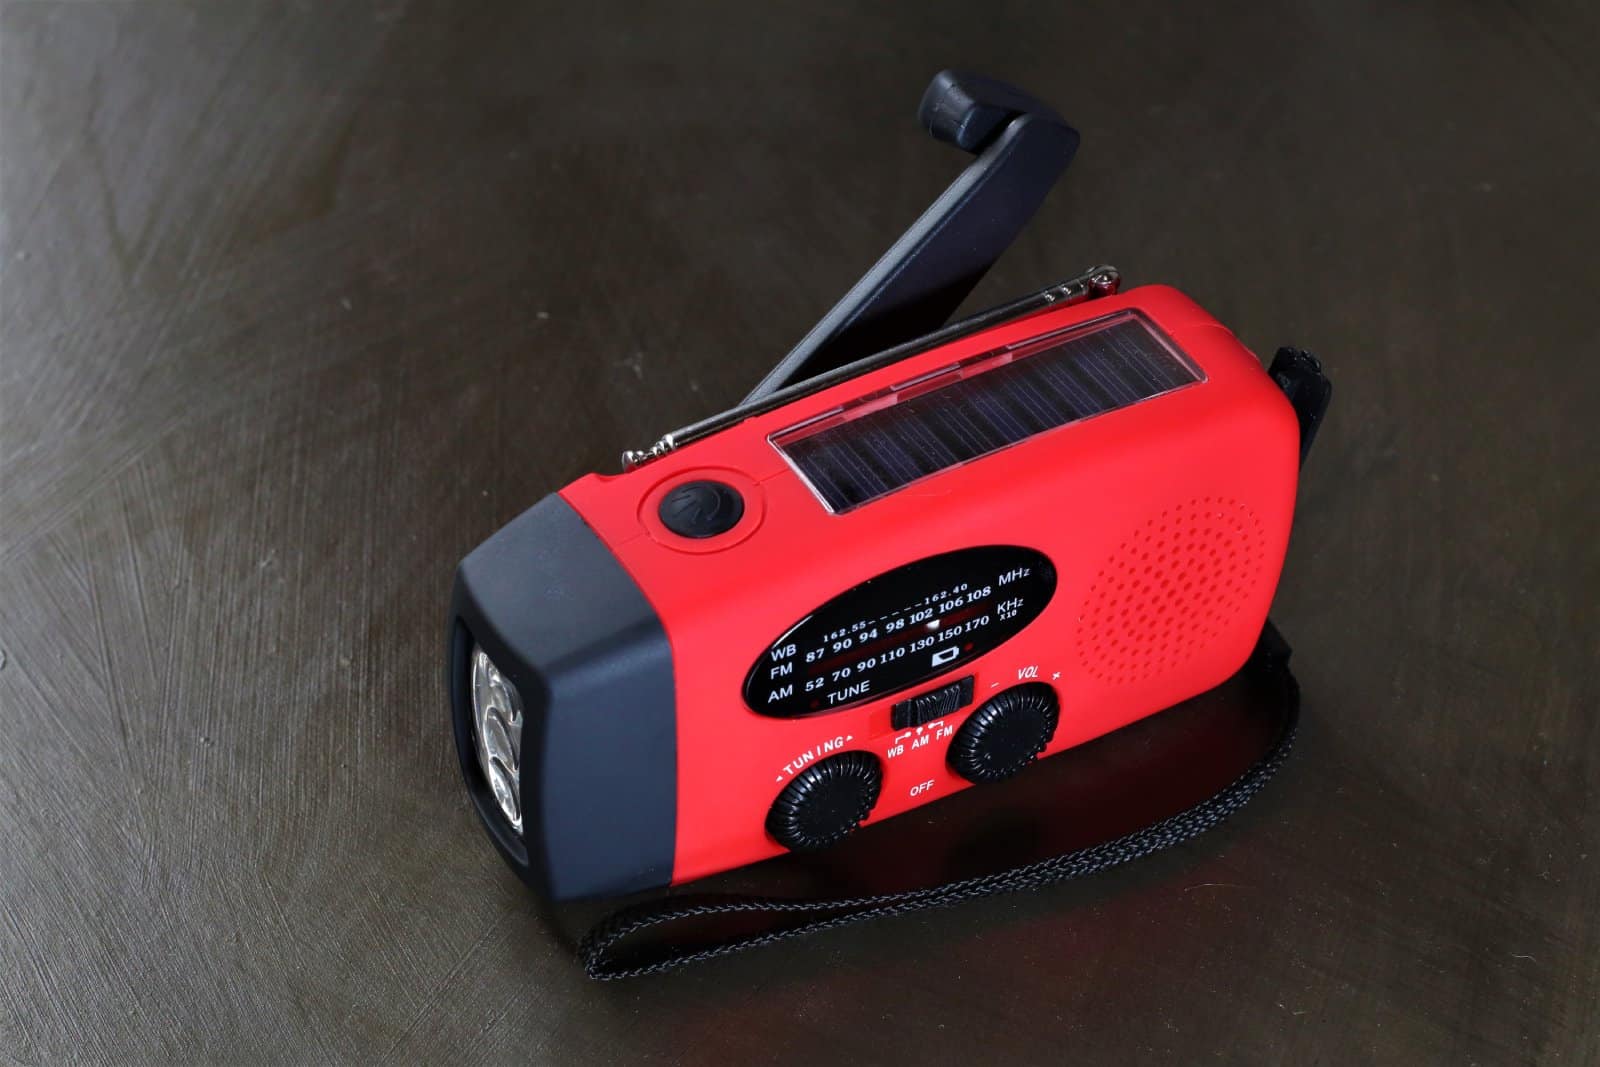 <p><span>A wind-up emergency radio is a sustainable gadget that keeps you informed and prepared without relying on electricity. These radios often include additional features like a flashlight or a USB charger and can be powered by hand cranking. It’s essential for remote travel, camping, or in areas prone to power outages or severe weather.</span></p> <p><b>Insider’s Tip: </b><span>Ensure the radio covers AM/FM bands and NOAA weather channels for comprehensive information.</span></p>